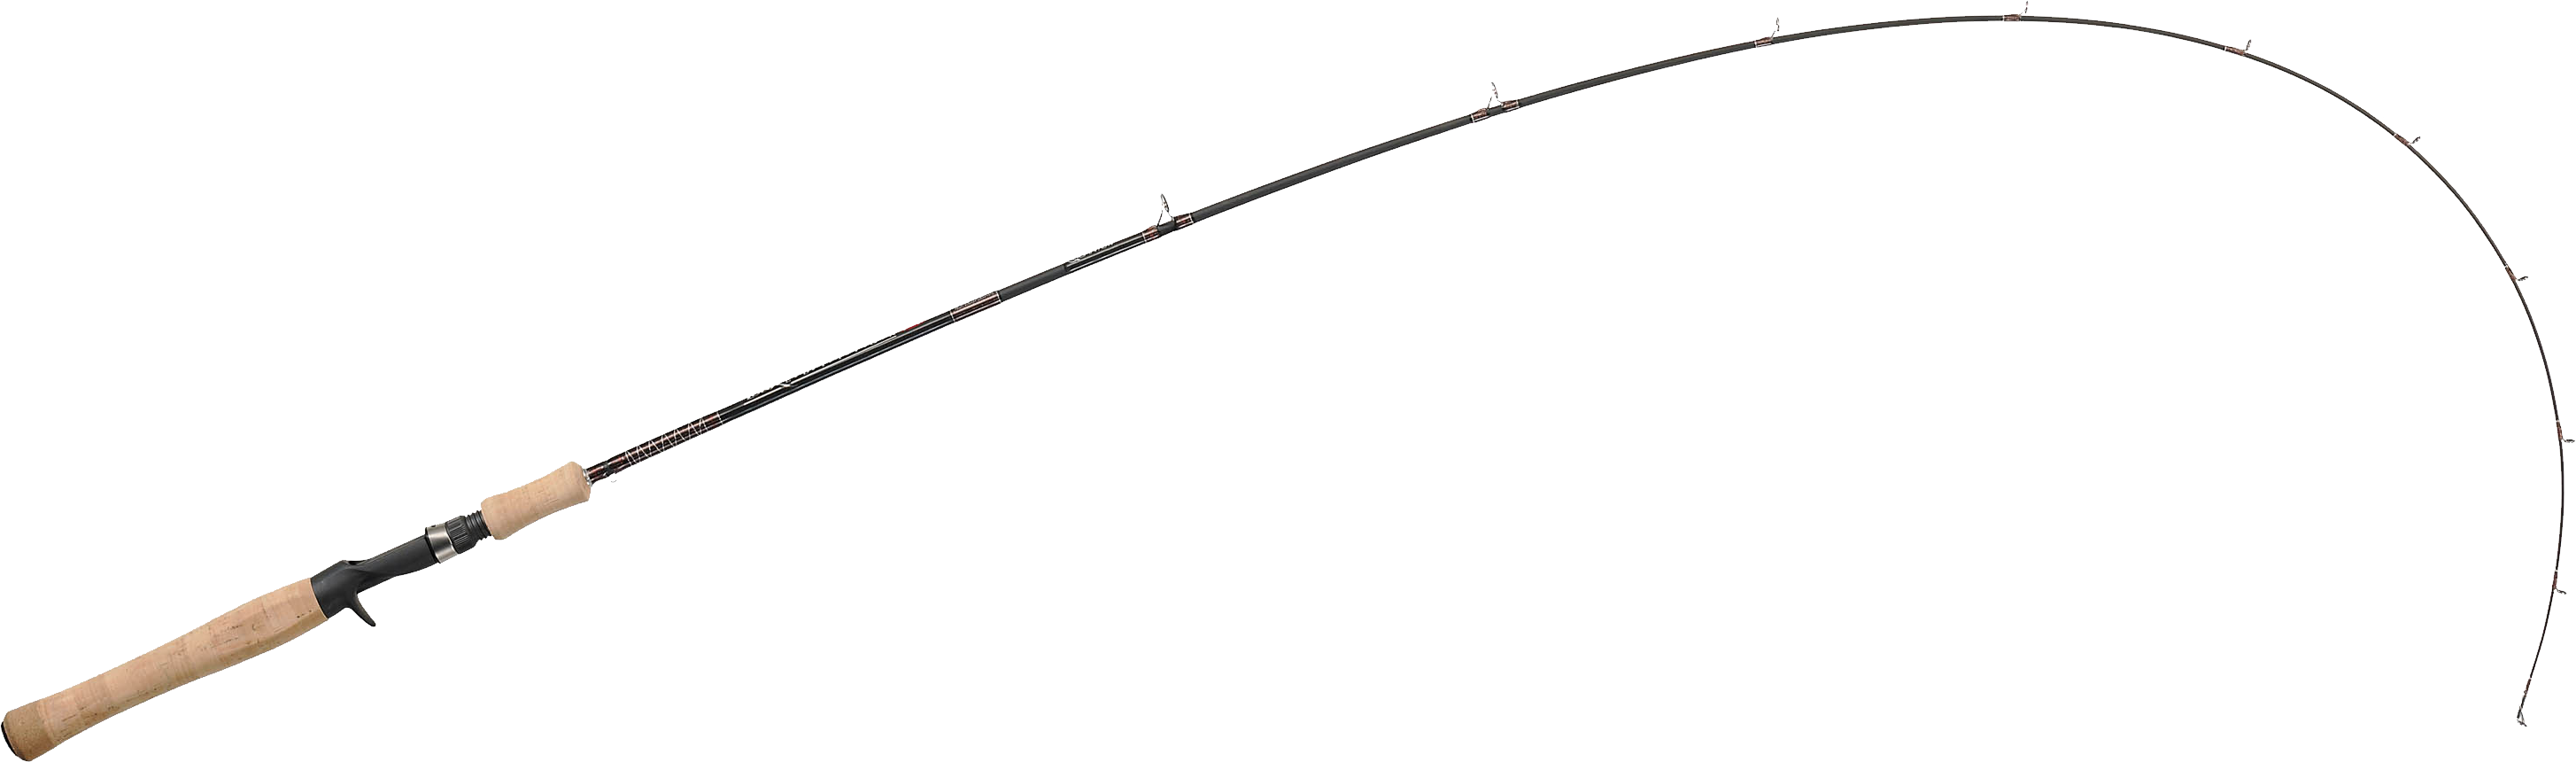 Fishing rod PNG image transparent image download, size: 2909x860px